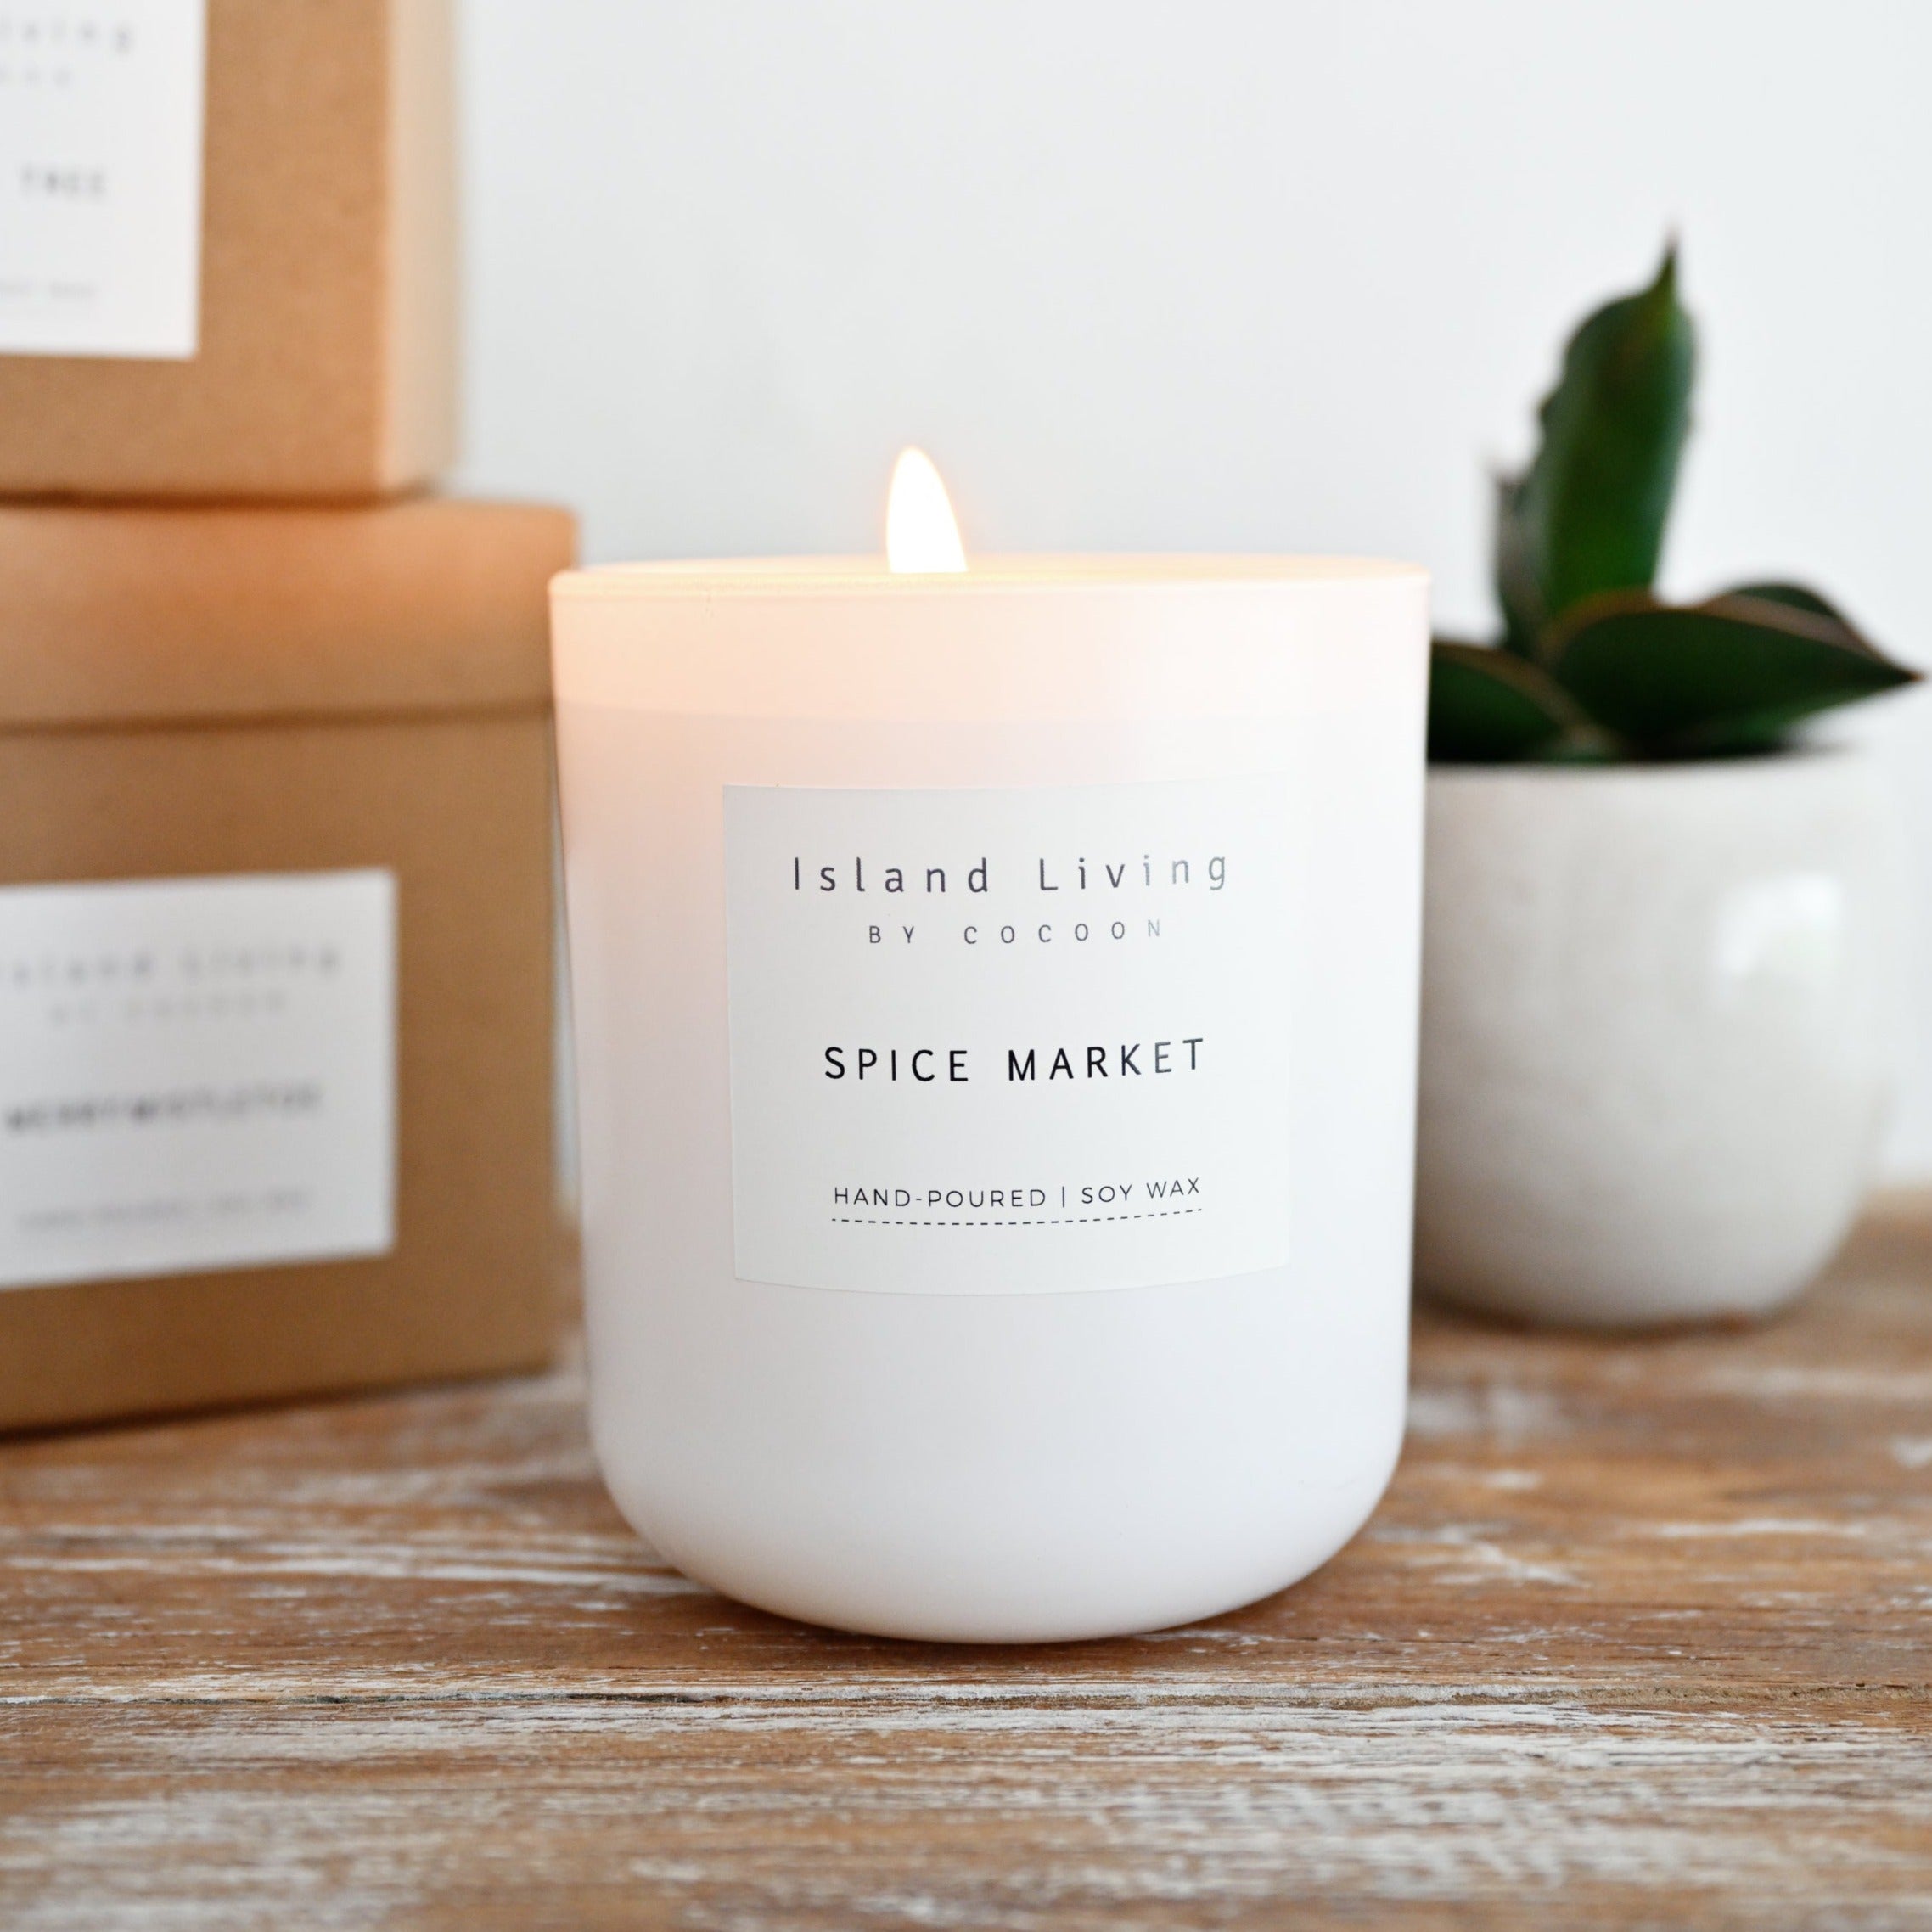 Spice Market Island Living Soy Candle